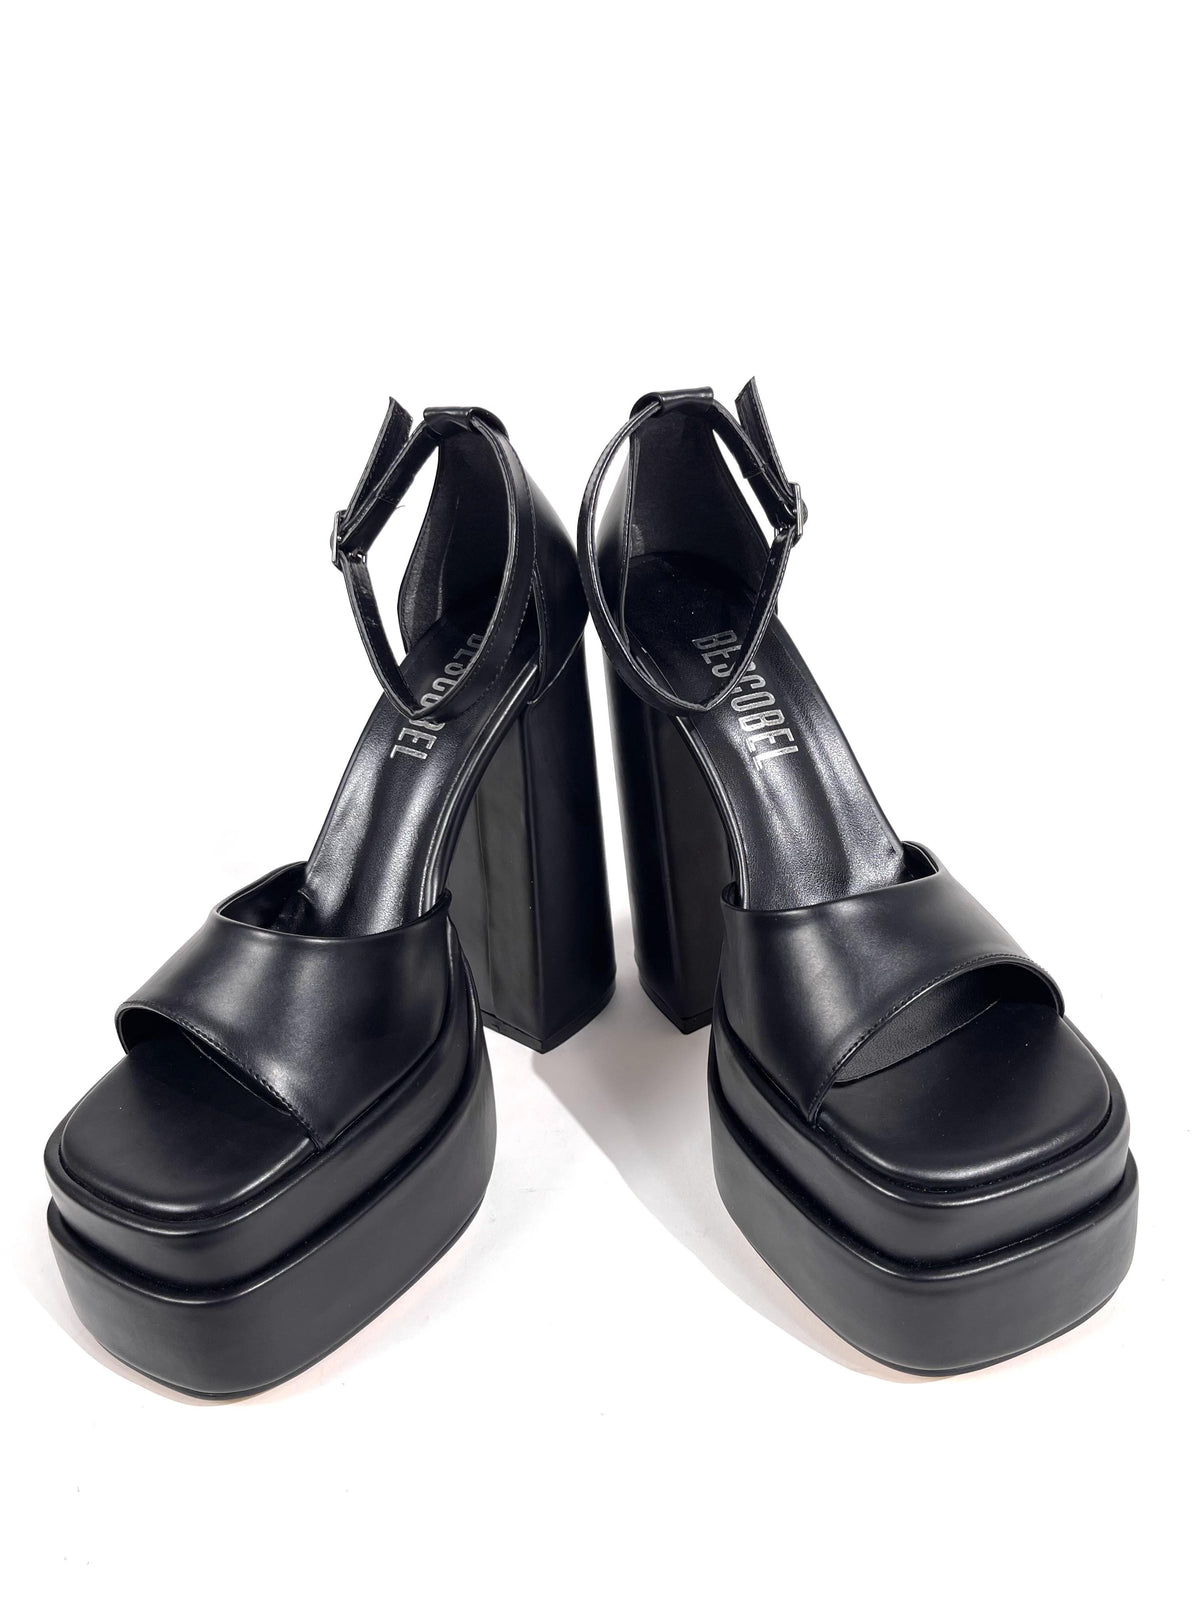 Women's Zoon Black Skin High Double Platform Open-Front Sandals Shoes - STREETMODE™